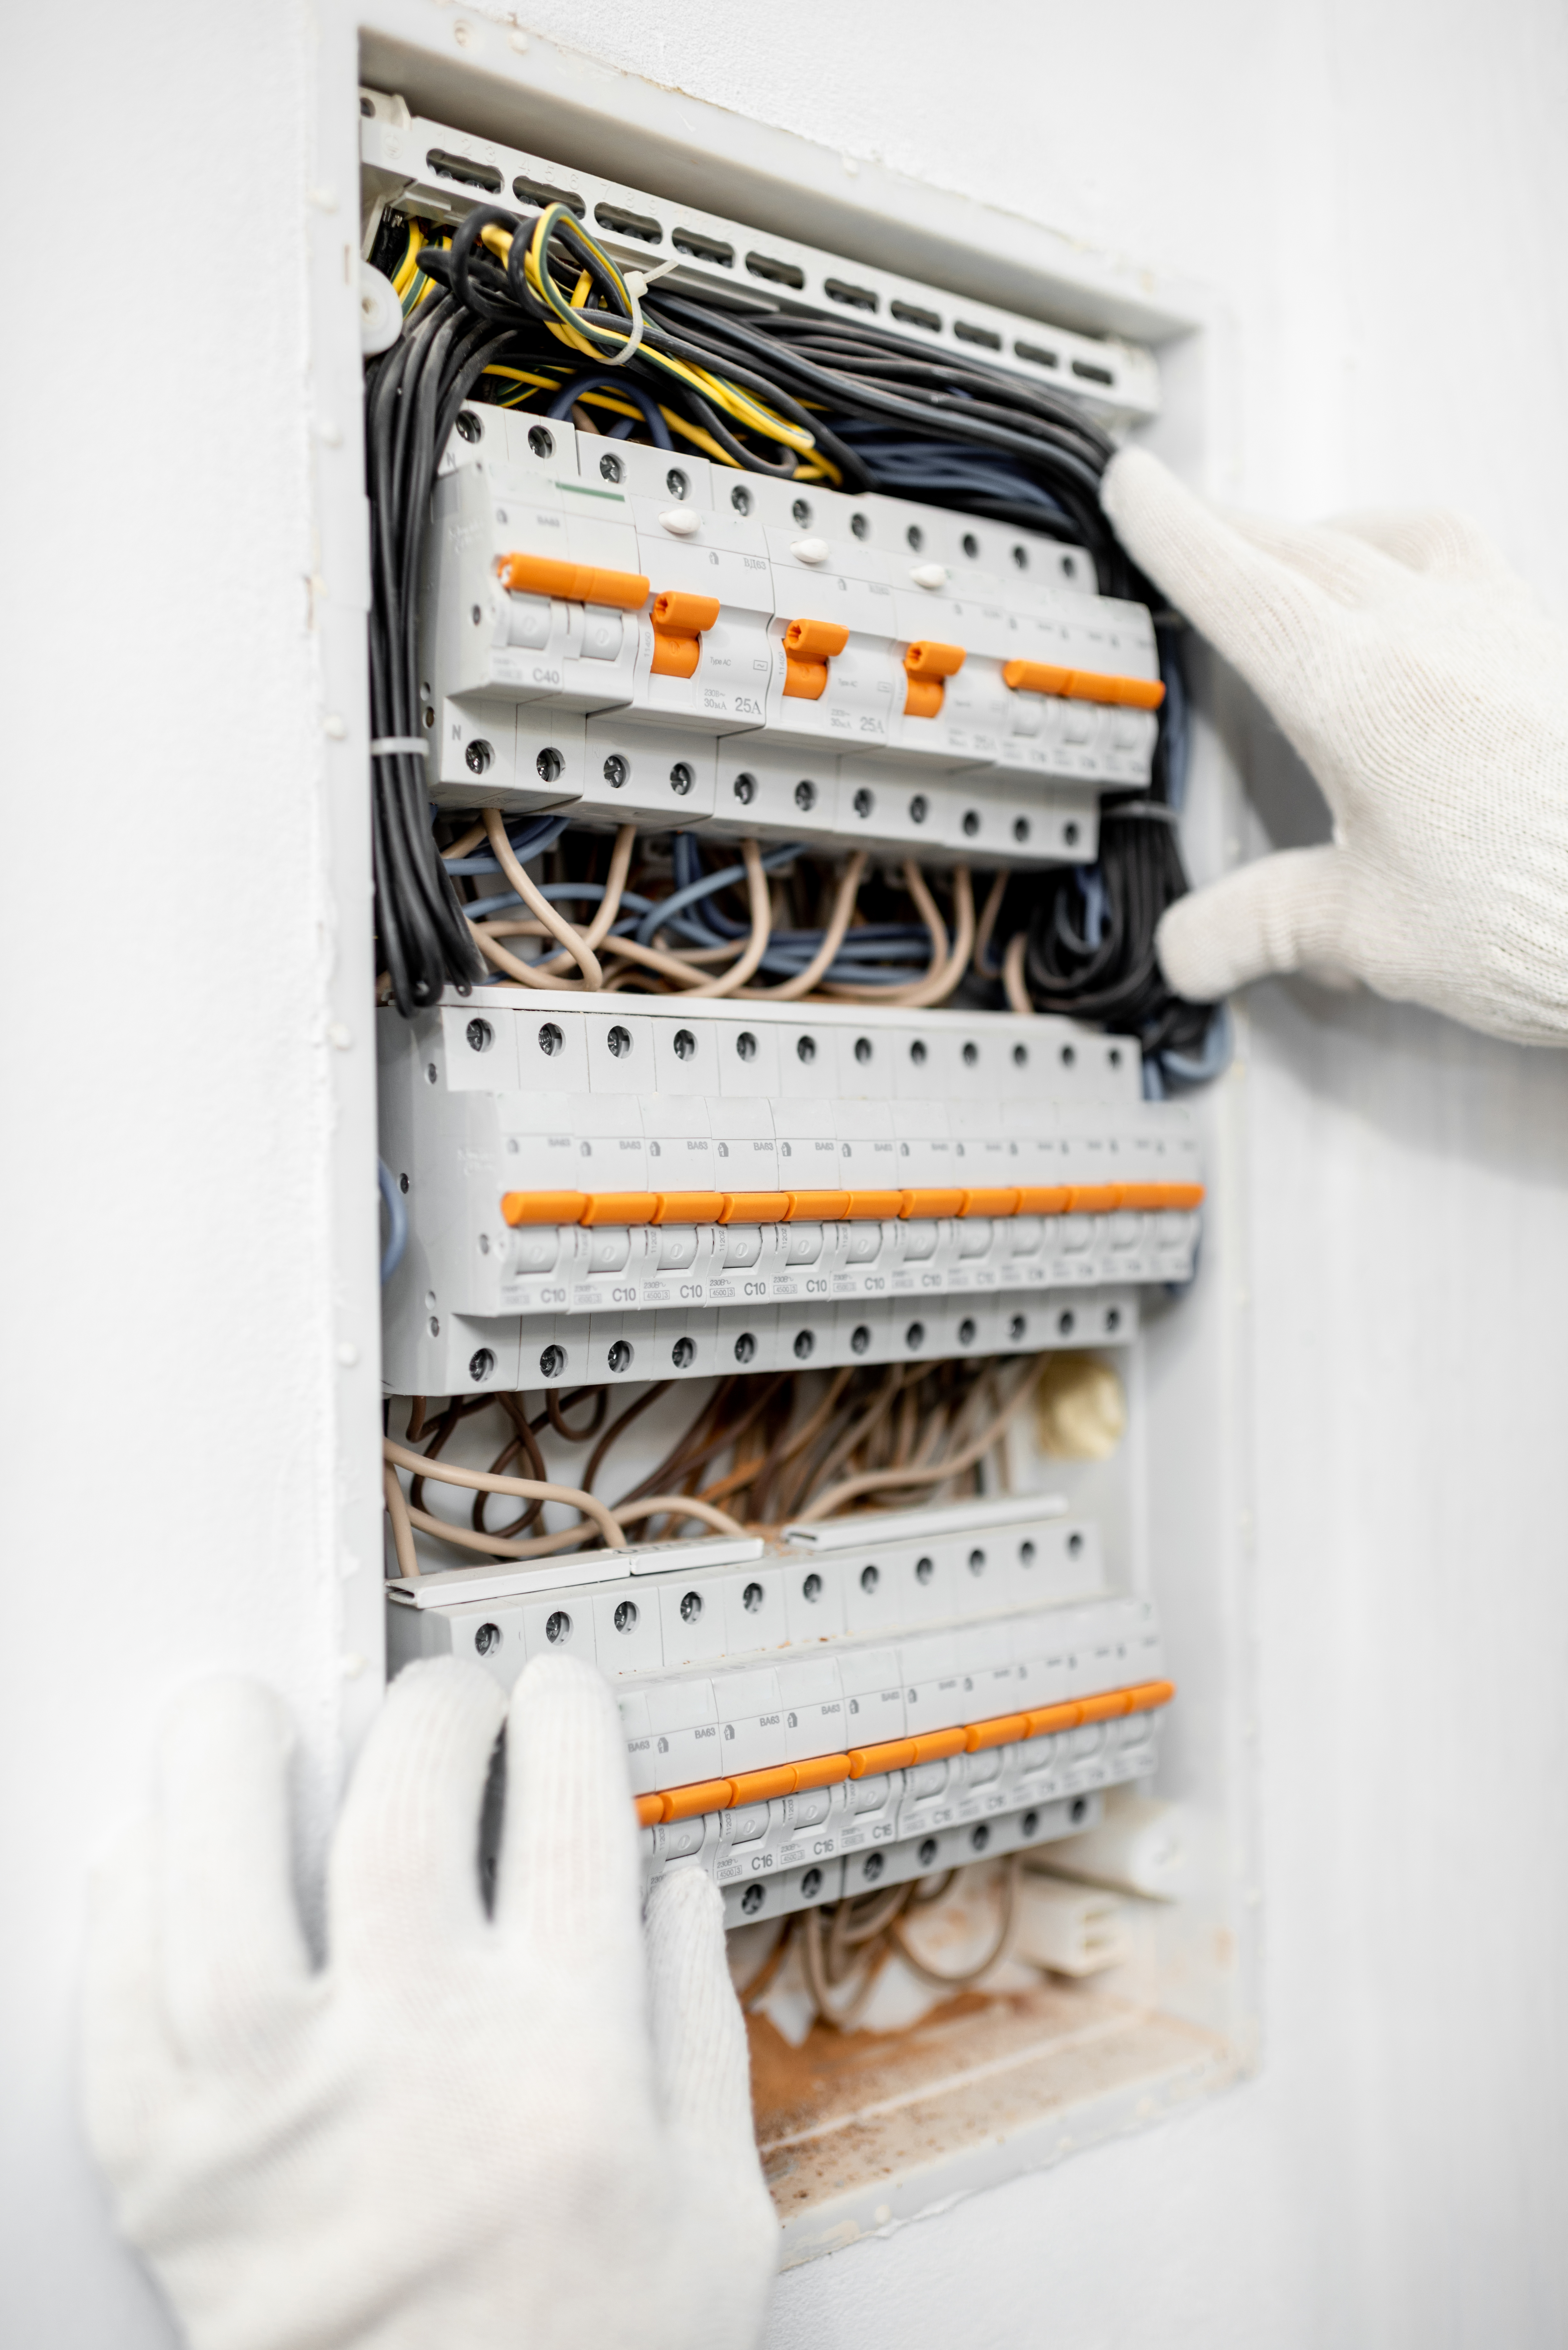 installing, repairing or supply of electrical panel